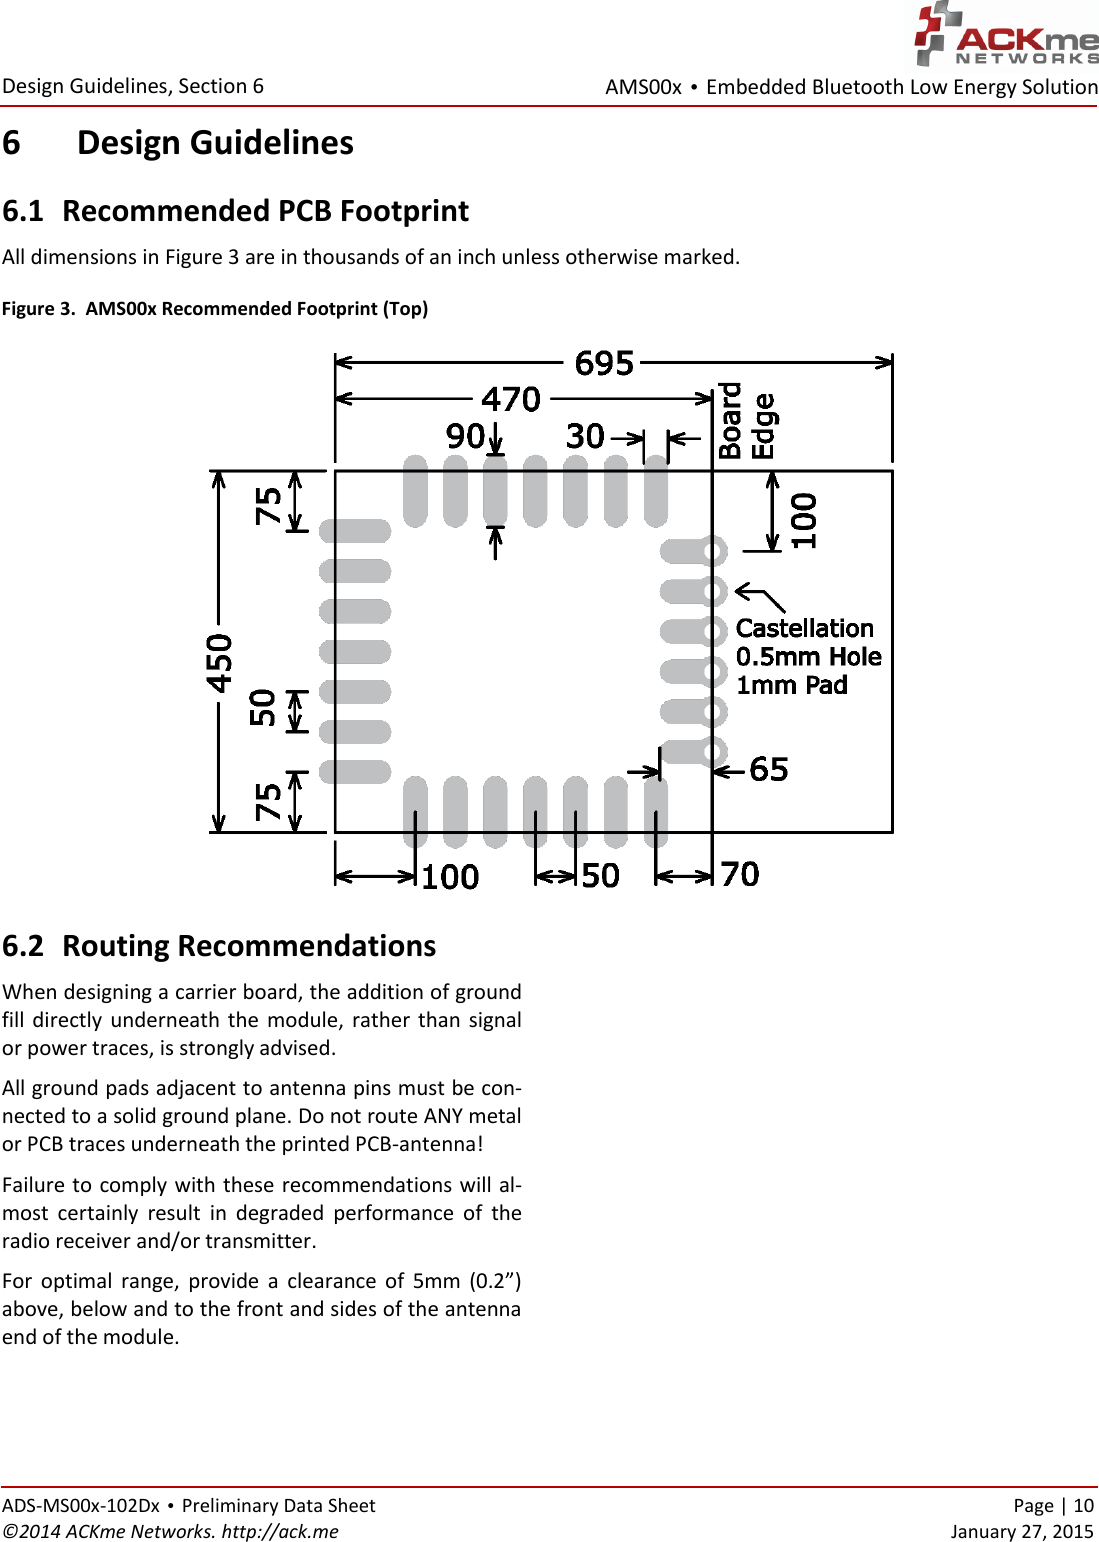 AMS00x • Embedded Bluetooth Low Energy Solution  Design Guidelines, Section 6 ADS-MS00x-102Dx • Preliminary Data Sheet    Page | 10 ©2014 ACKme Networks. http://ack.me    January 27, 2015 6 Design Guidelines 6.1 Recommended PCB Footprint All dimensions in Figure 3 are in thousands of an inch unless otherwise marked. Figure 3.  AMS00x Recommended Footprint (Top)  6.2 Routing Recommendations When designing a carrier board, the addition of ground fill  directly  underneath the module,  rather  than  signal or power traces, is strongly advised.  All ground pads adjacent to antenna pins must be con-nected to a solid ground plane. Do not route ANY metal or PCB traces underneath the printed PCB-antenna!  Failure to comply with these recommendations will al-most  certainly  result  in  degraded  performance  of  the radio receiver and/or transmitter.  For  optimal  range,  provide  a  clearance  of  5mm  (0.2”) above, below and to the front and sides of the antenna end of the module. 